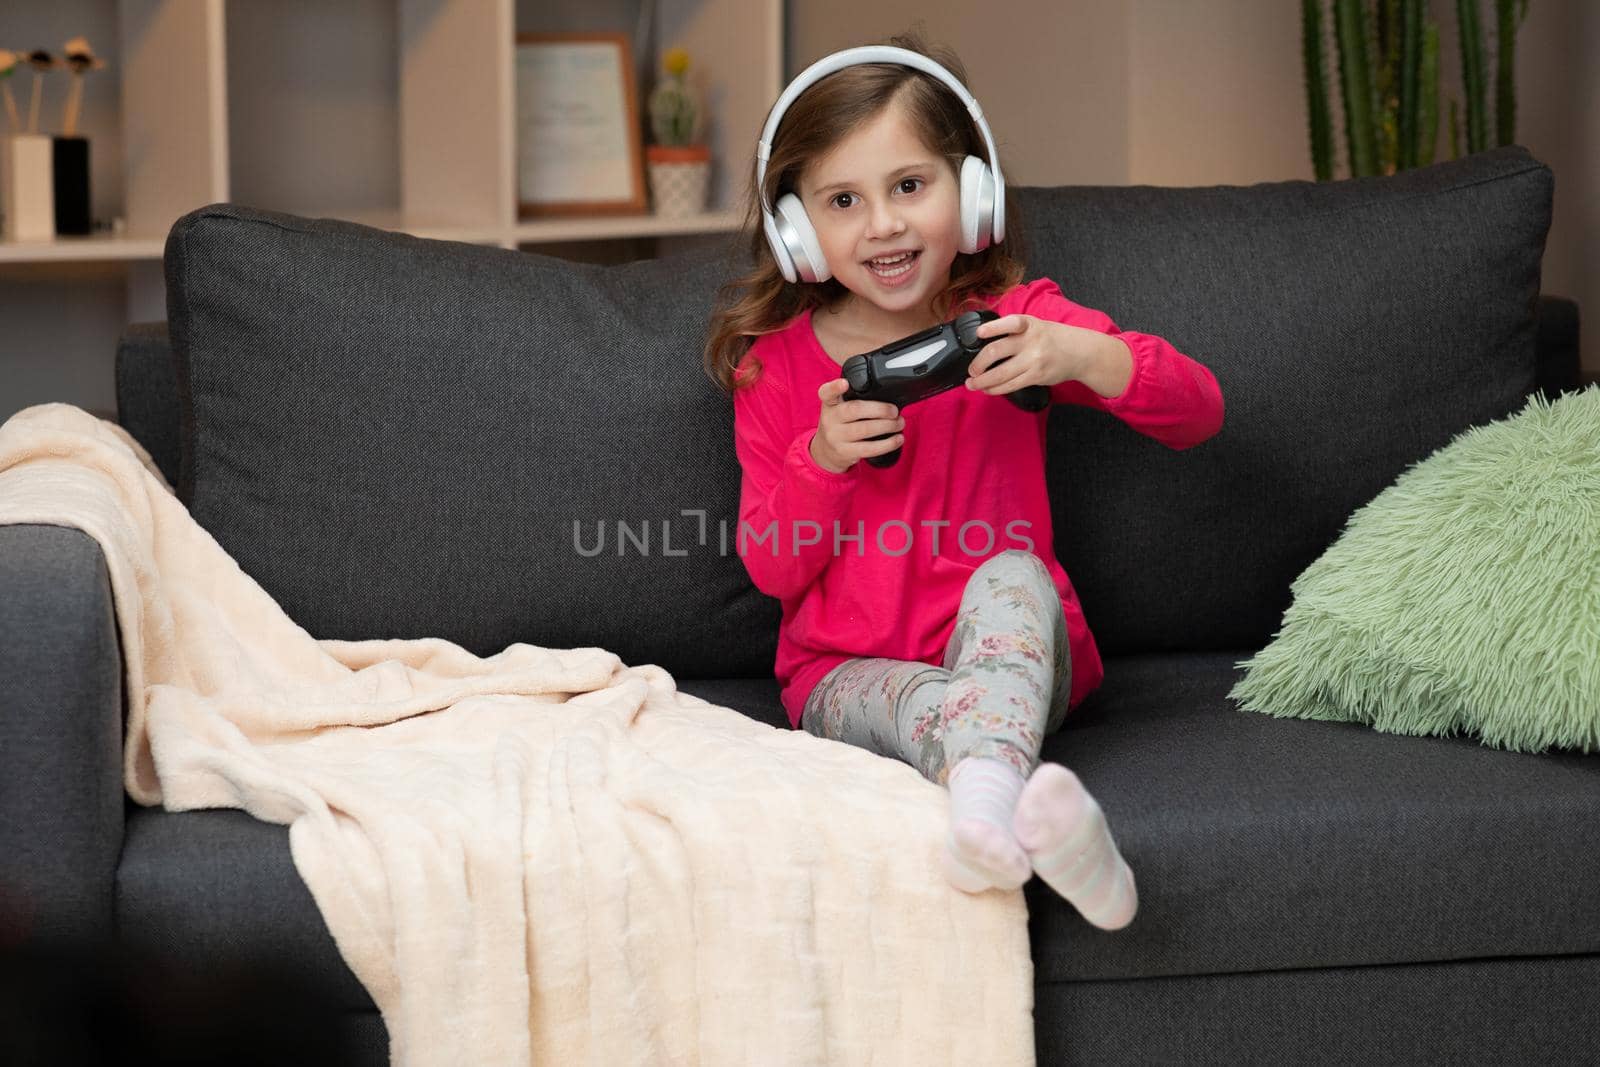 Young Little girl sitting on sofa playing a video in living room at home. Excited gamer girl hand holding joystick playing console game using a wireless controller. Having fun,enjoy happy expression by uflypro